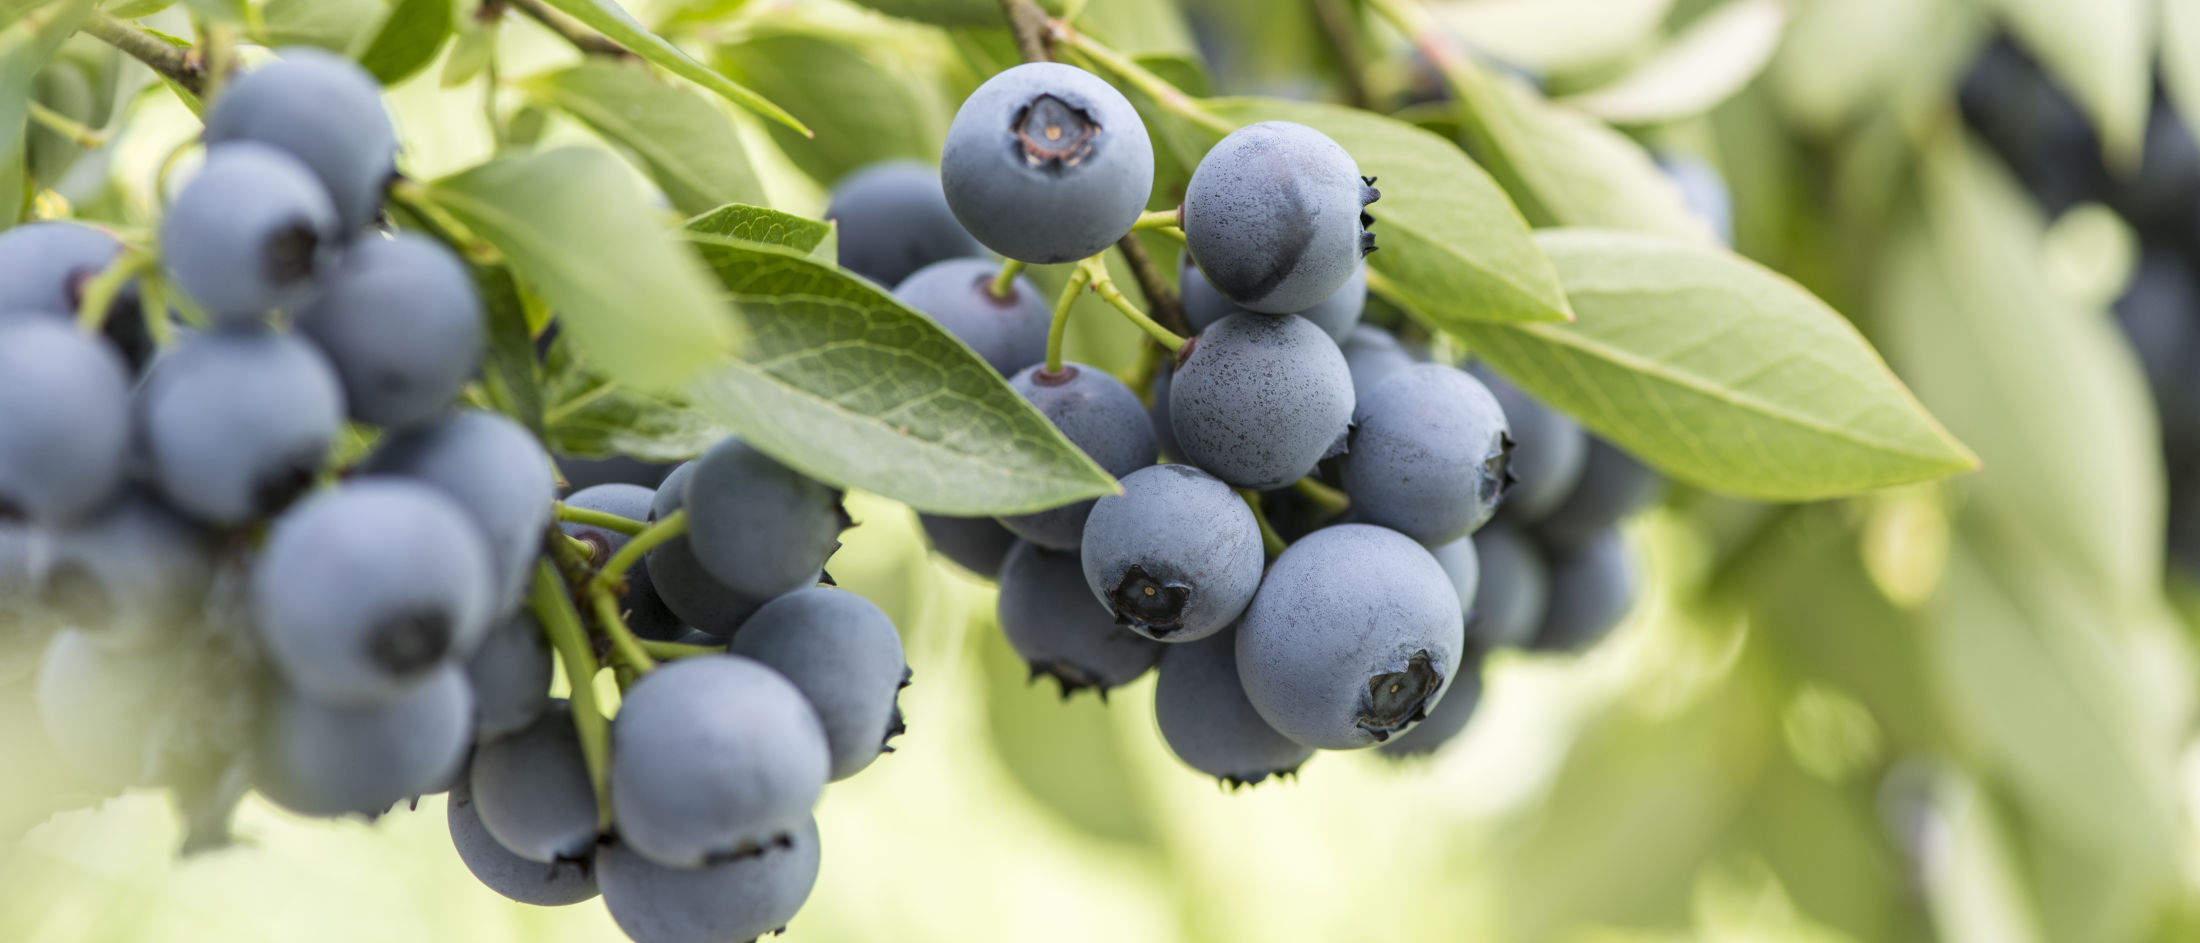 Climate change impacts on blueberry